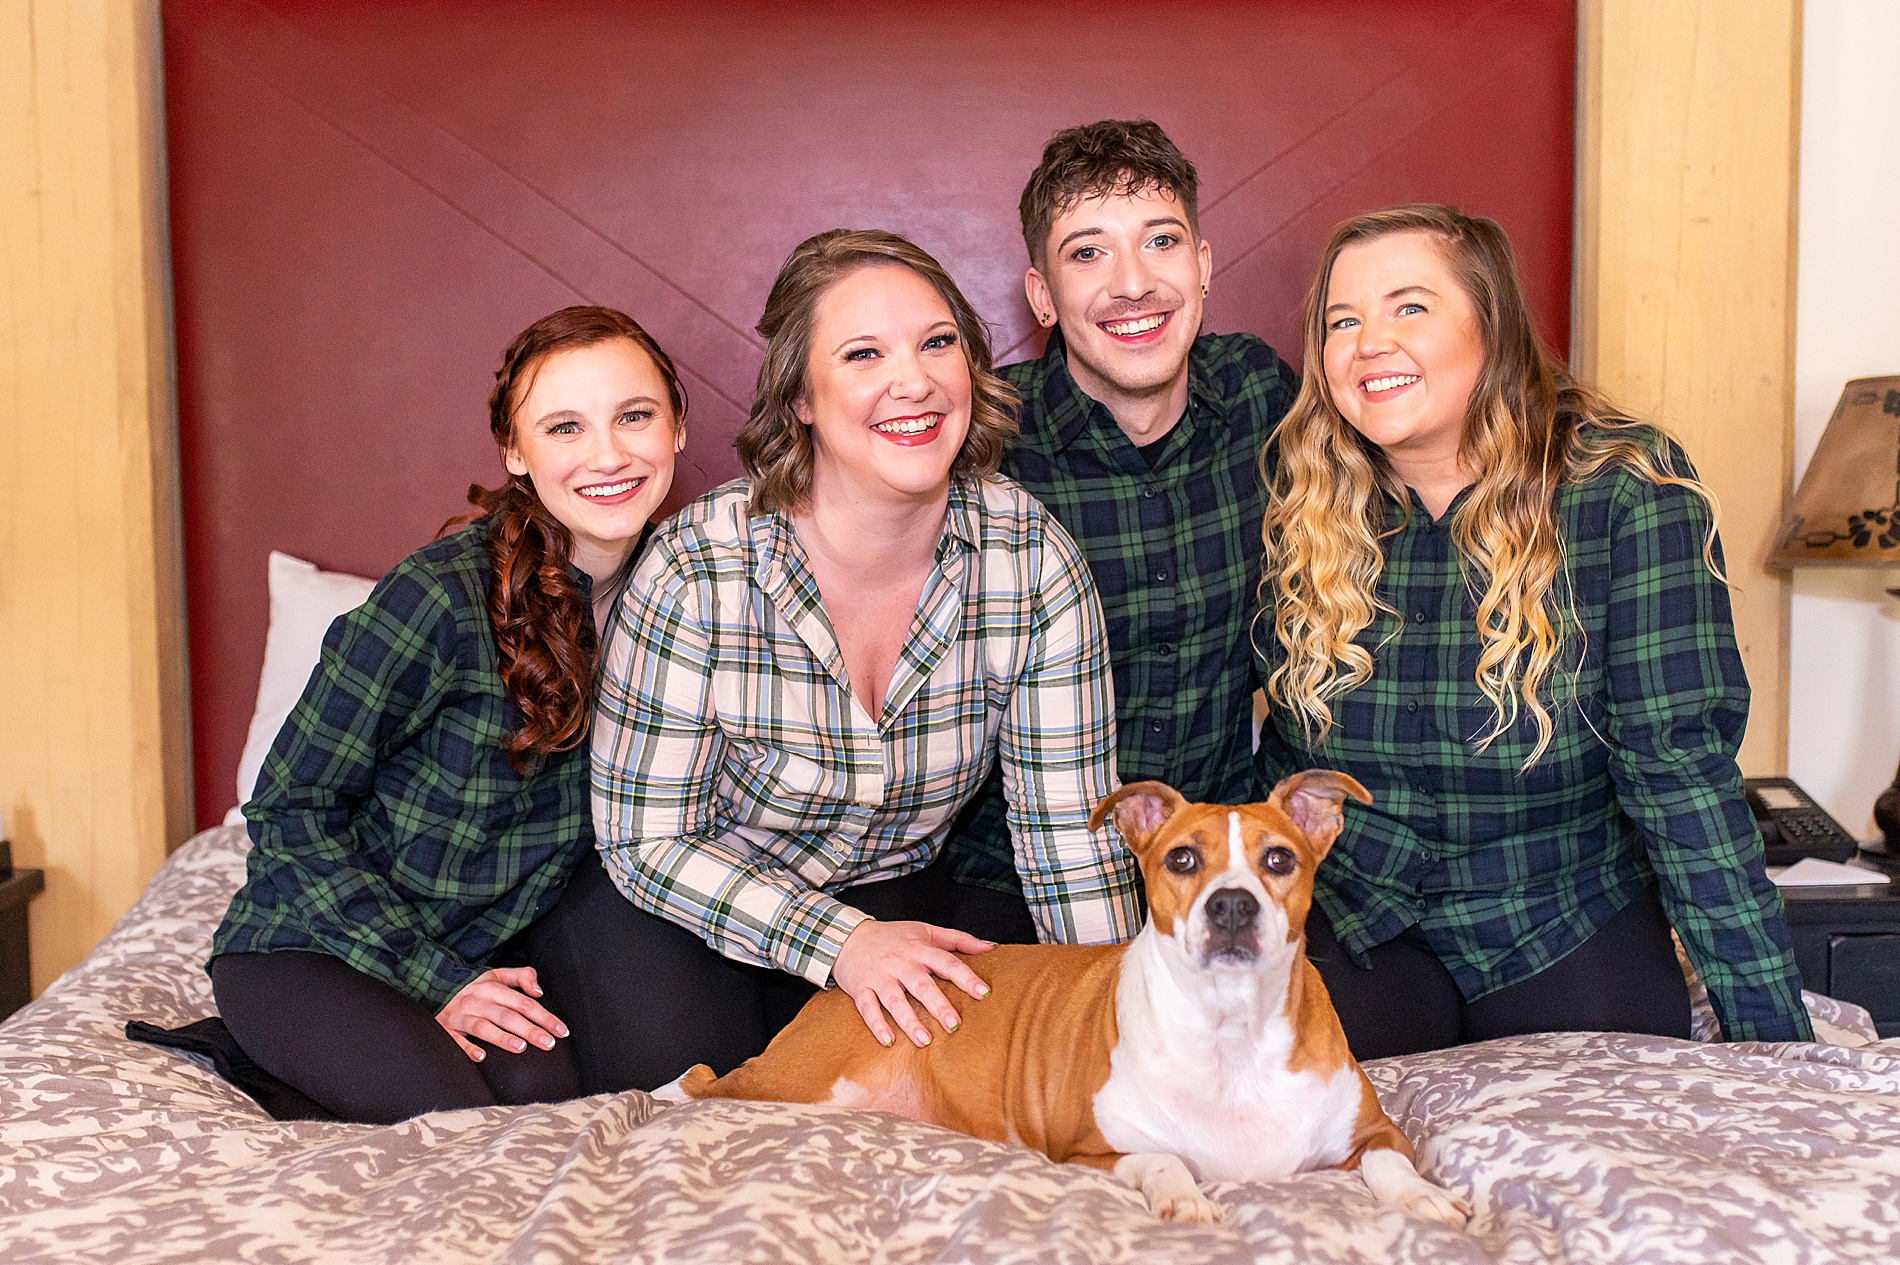 bride with her crew in matching plaid shirts